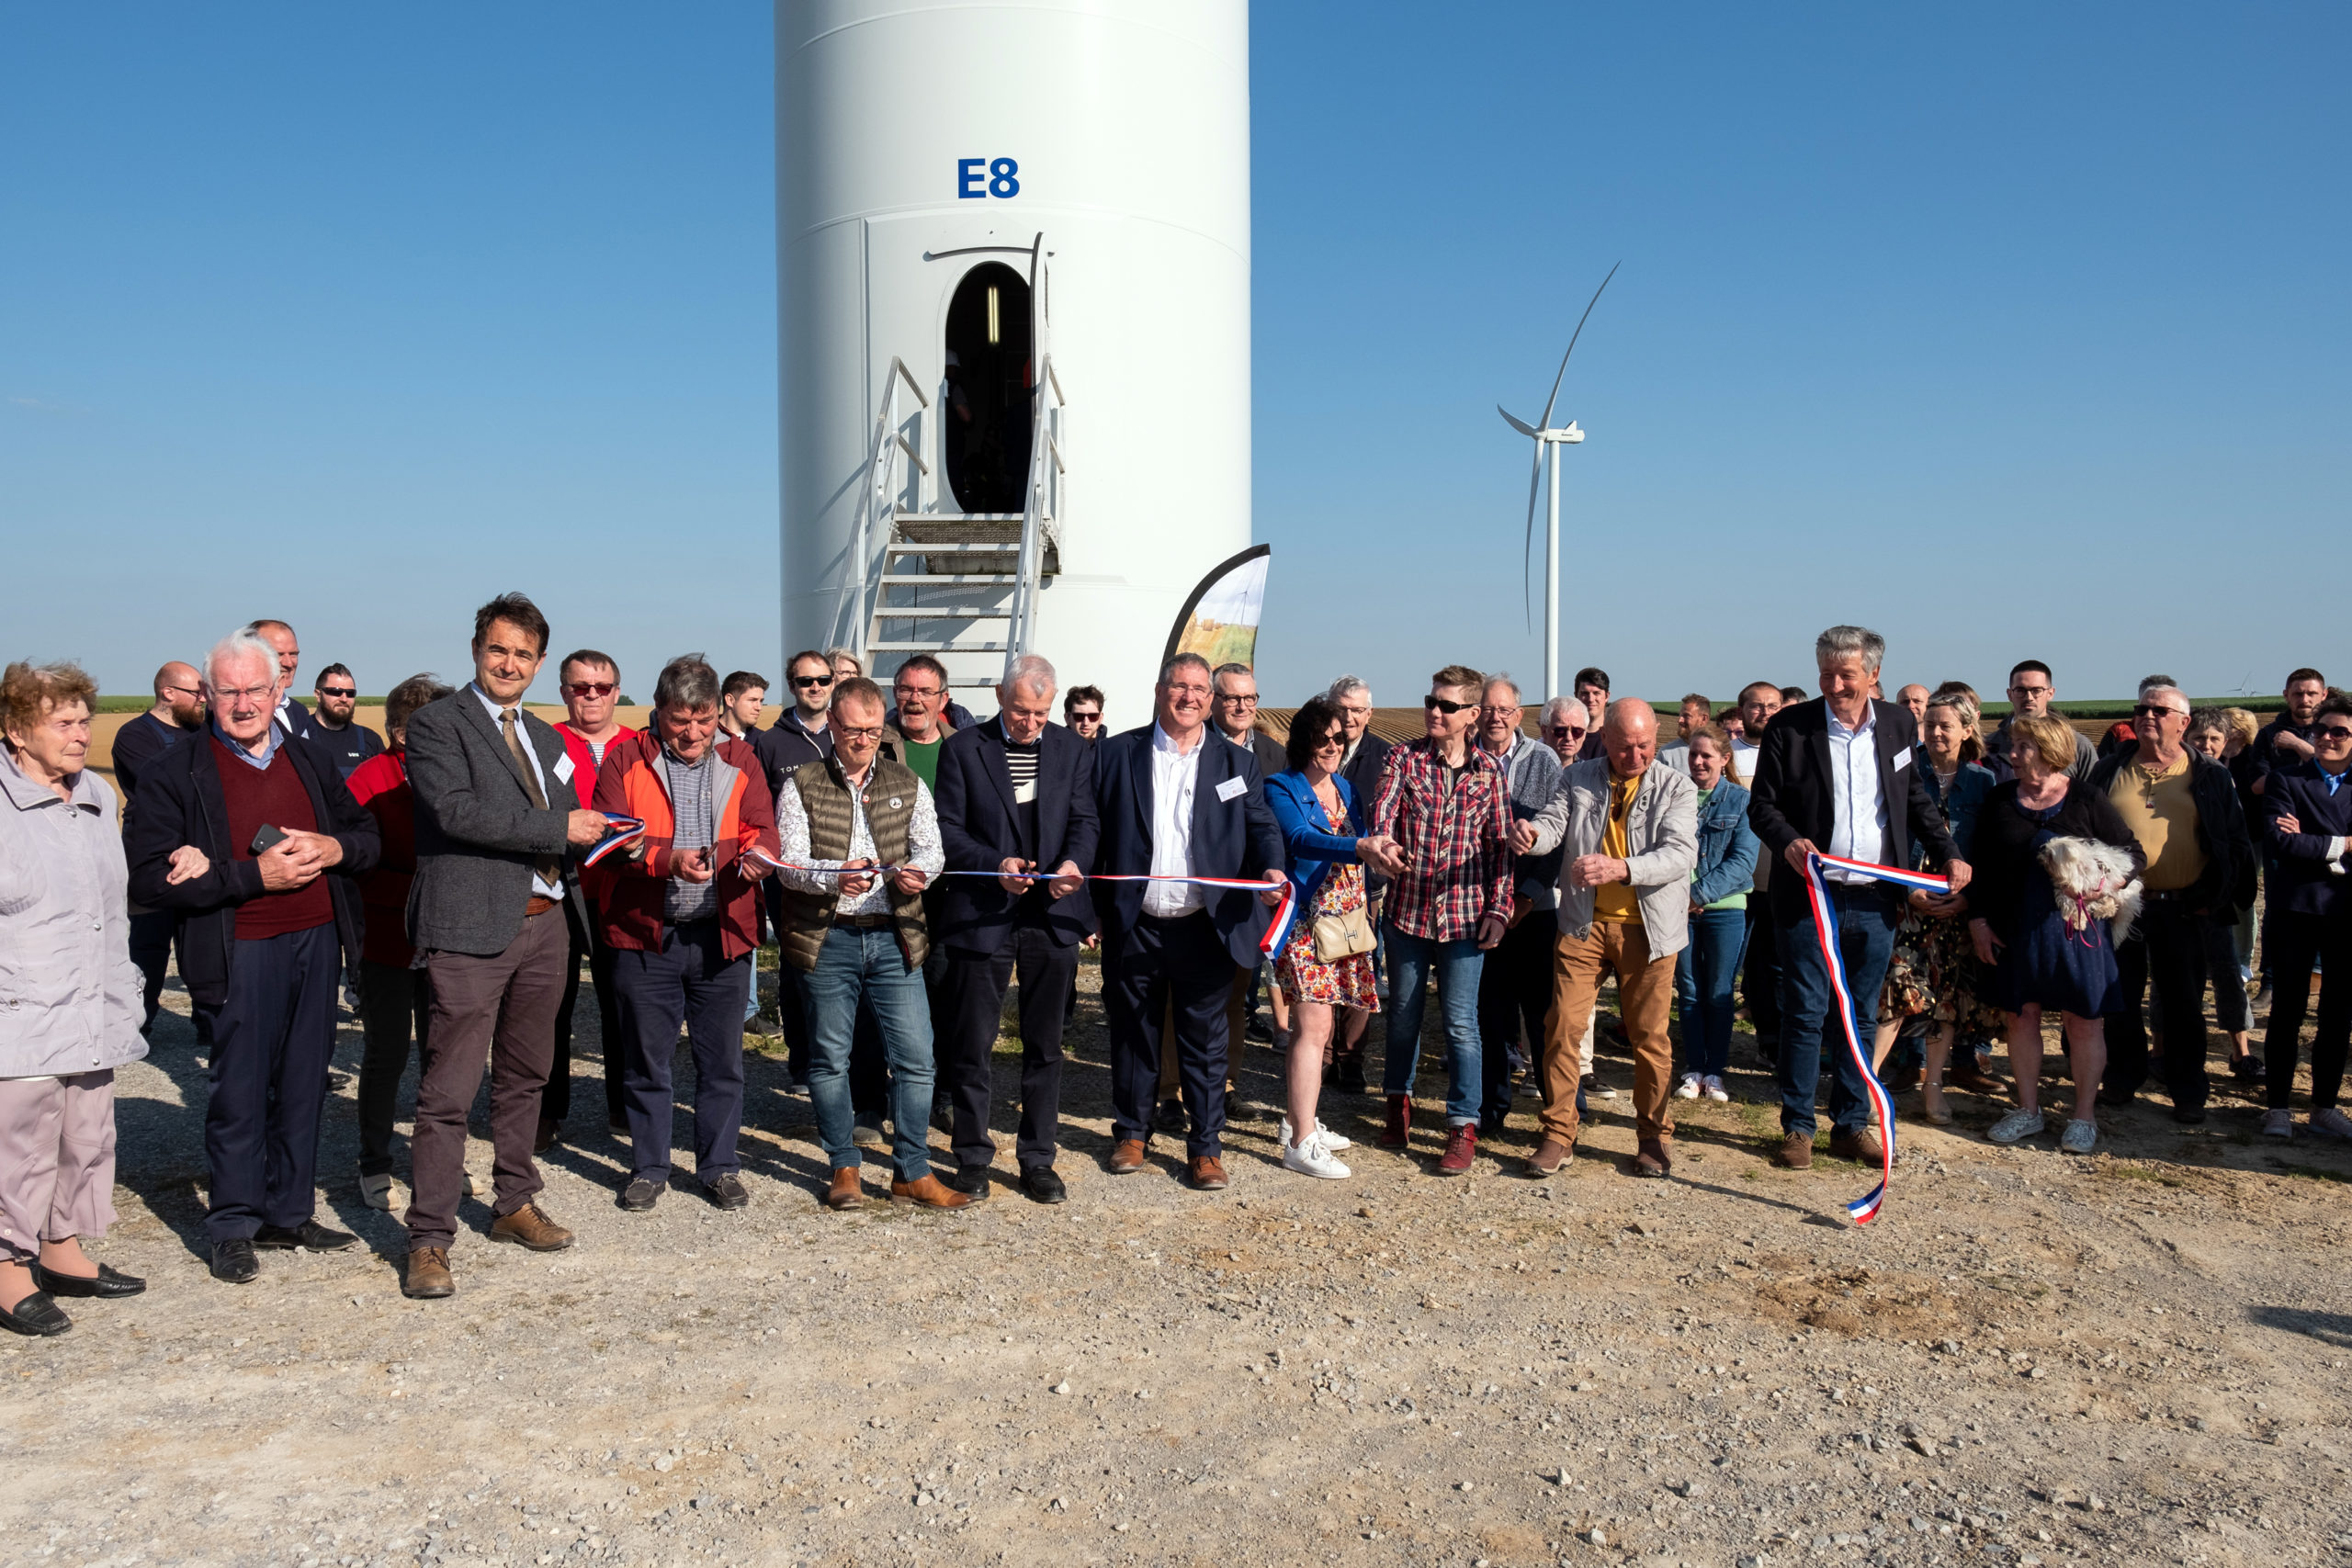 Inauguration Eoliennes Lieramont 20230525 094 1 scaled 1